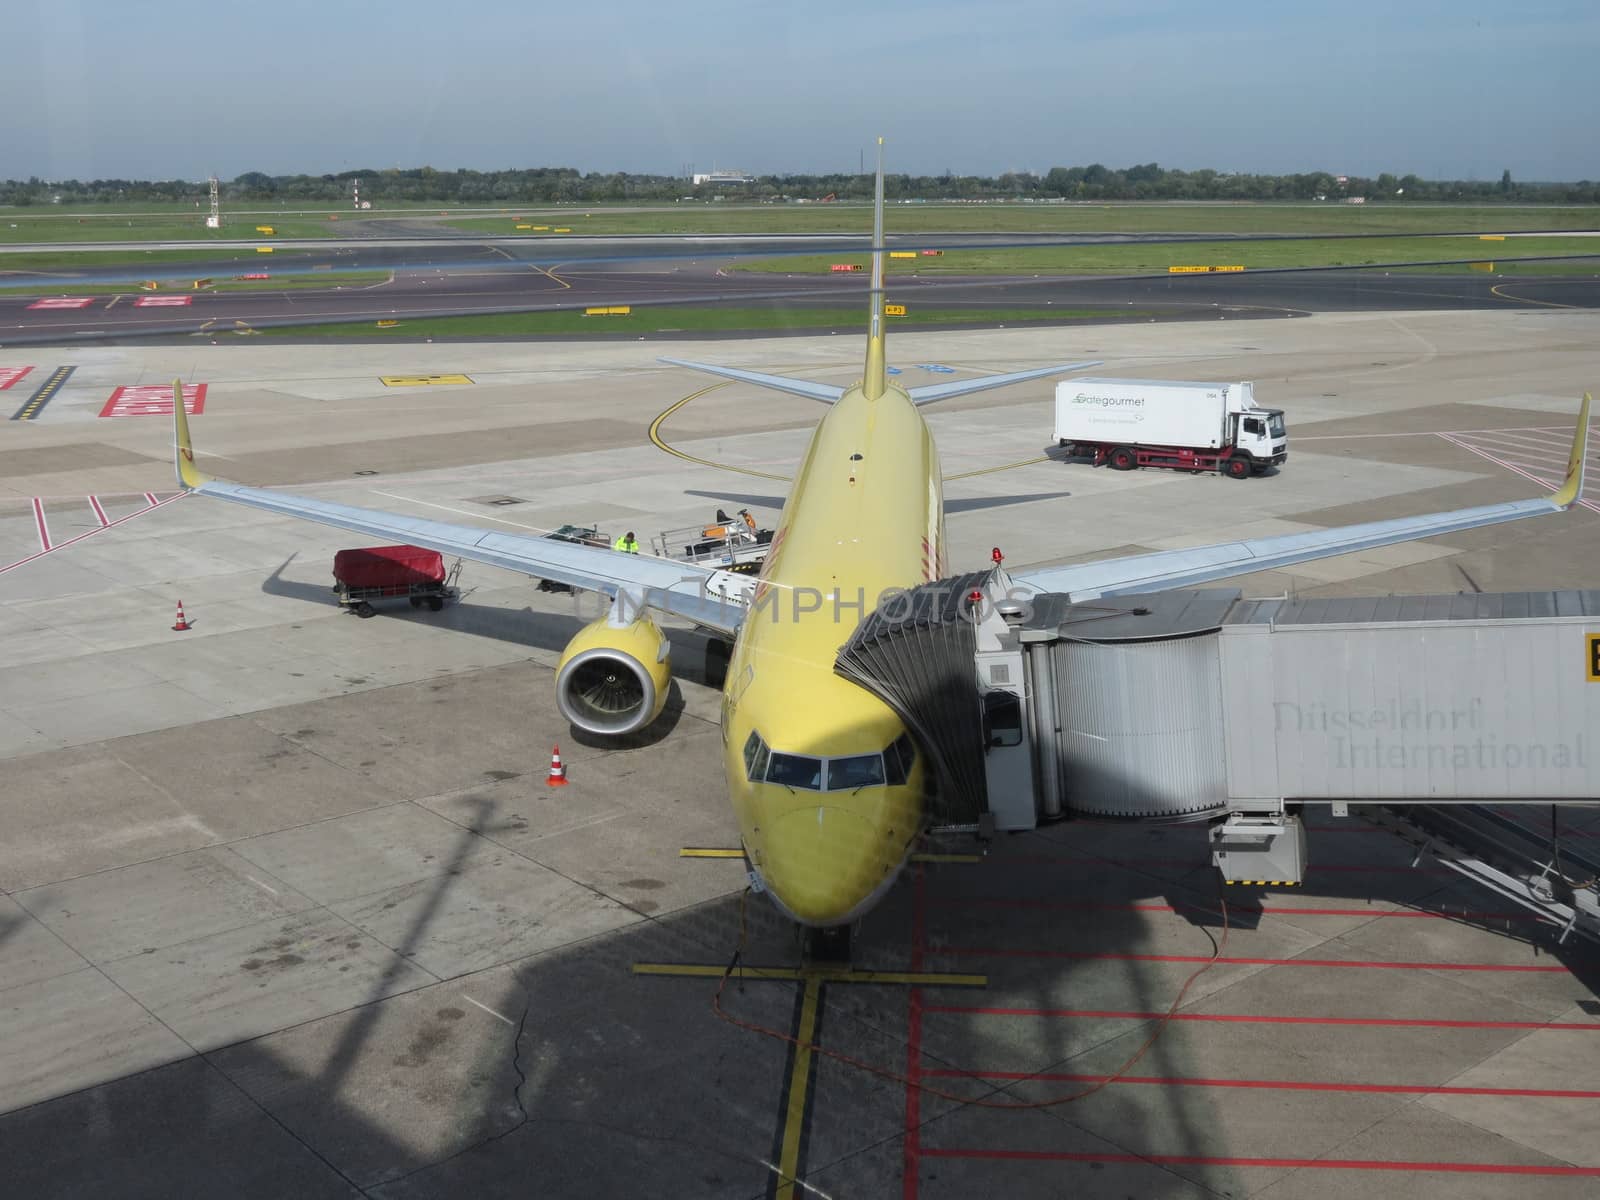 DUESSELDORF (GERMANY), CIRCA OCTOBER 2013: airplane of the DHL mail company parked at the airport ready for boarding, in Duesseldorf, October 2013 